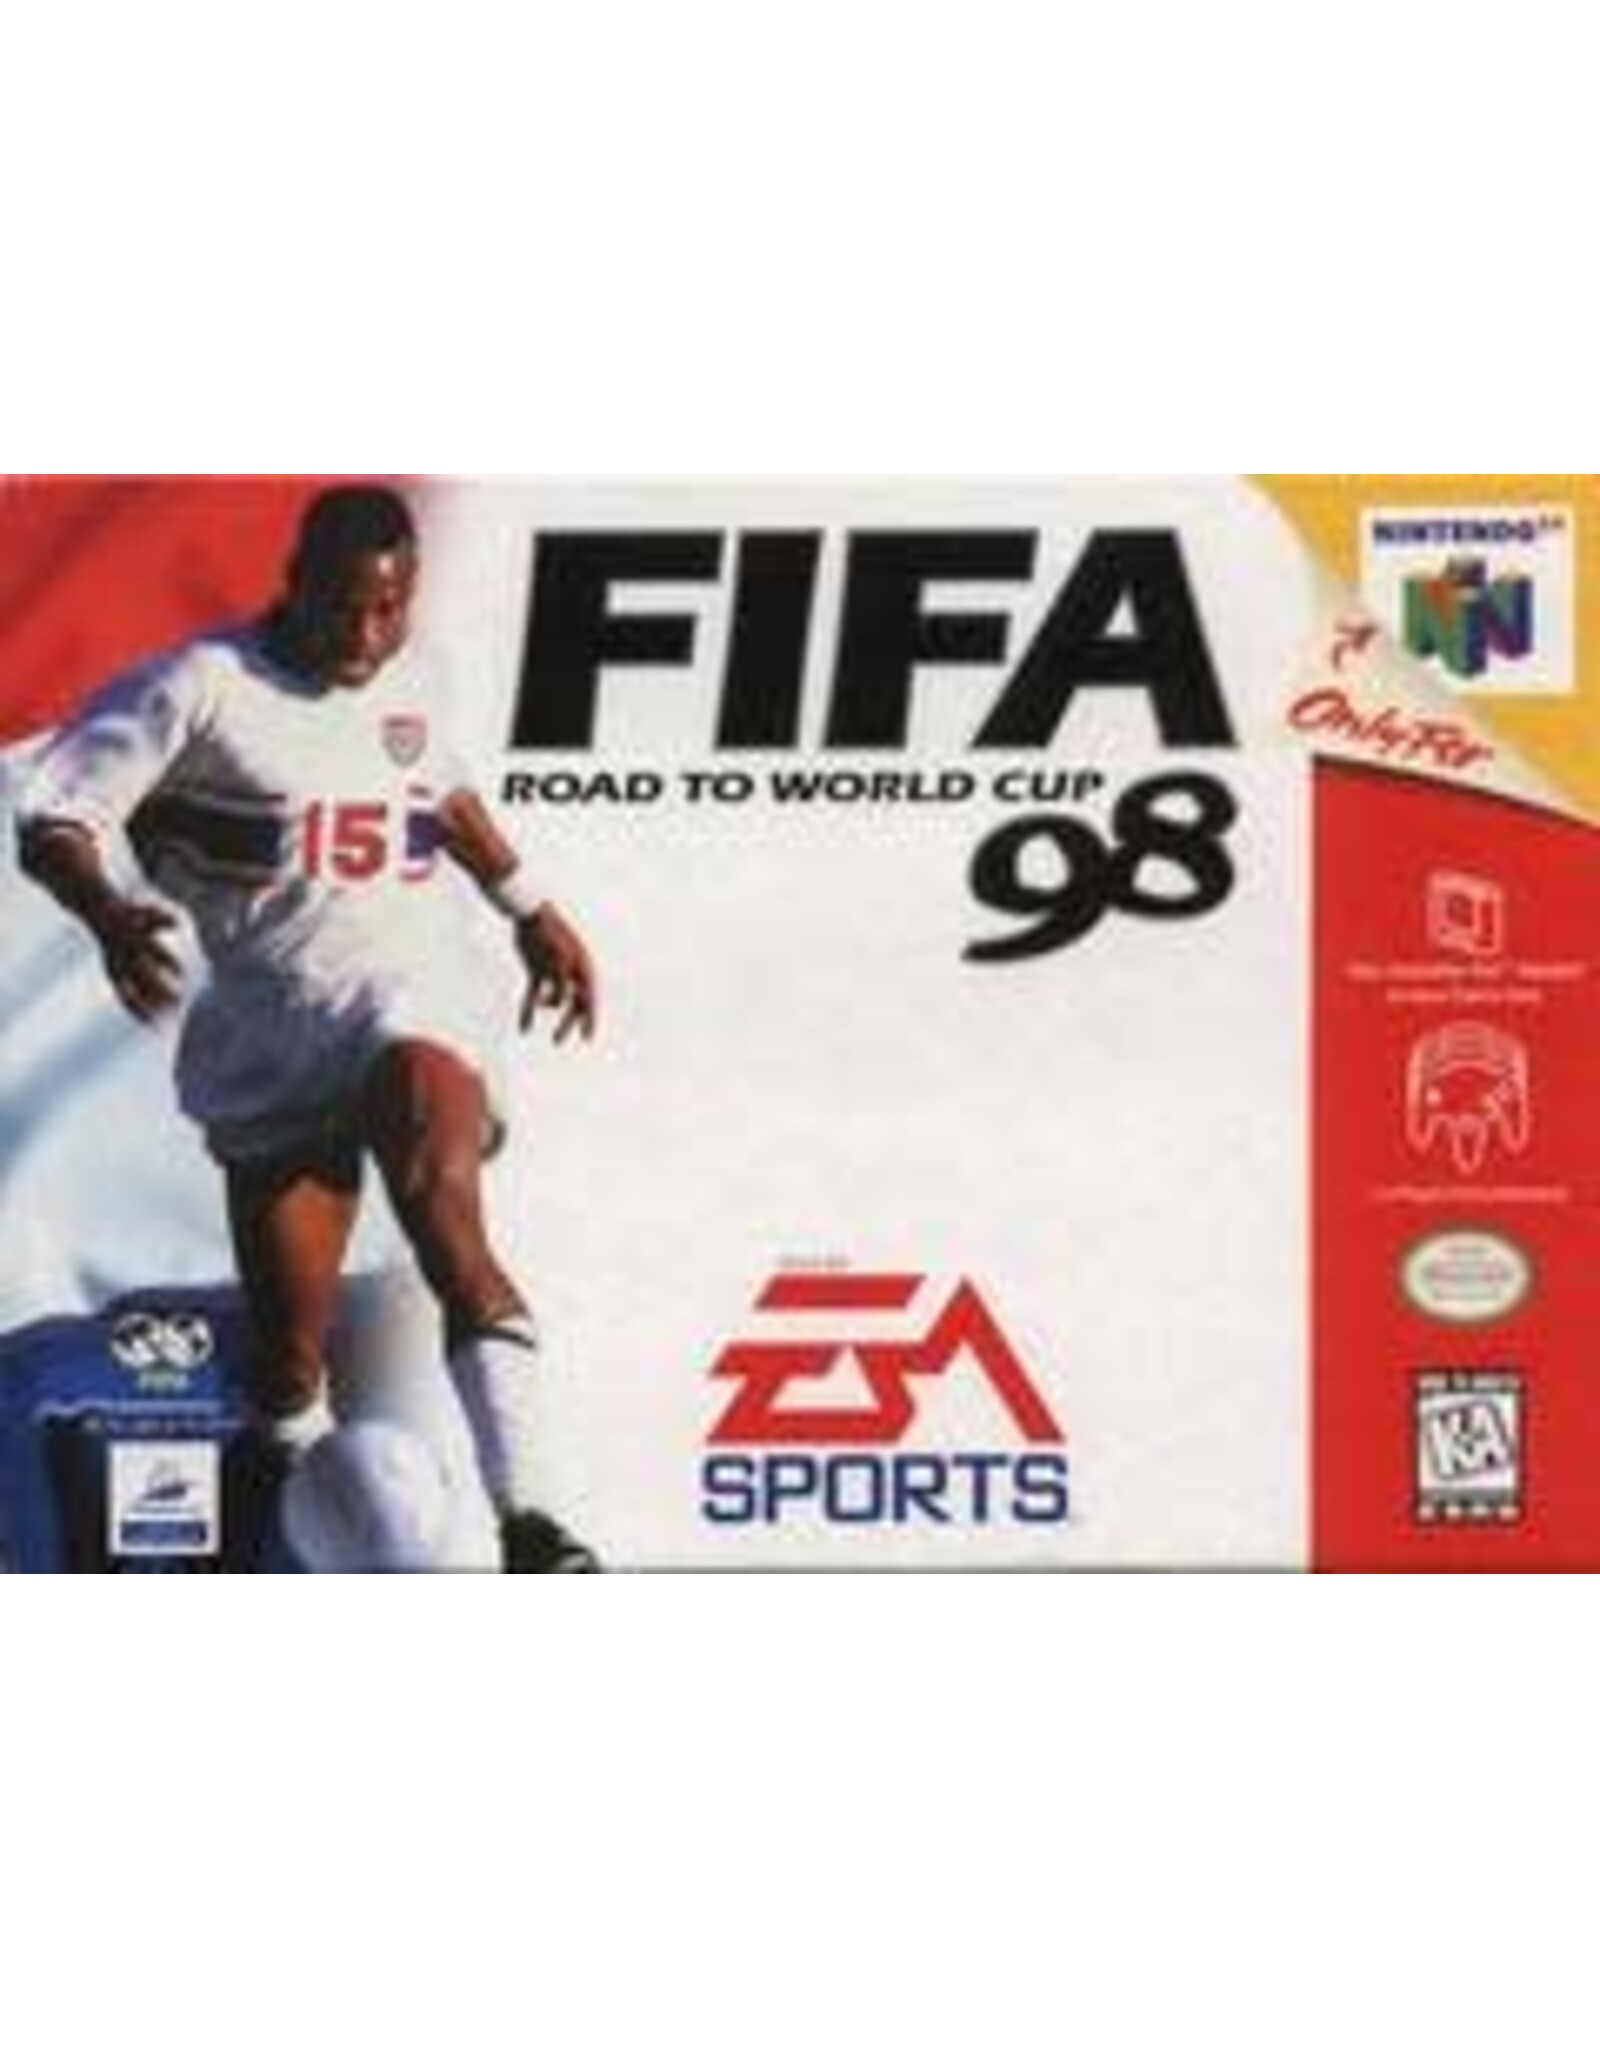 Nintendo 64 FIFA Road to World Cup 98 (Cart Only, Cosmetic Damage)